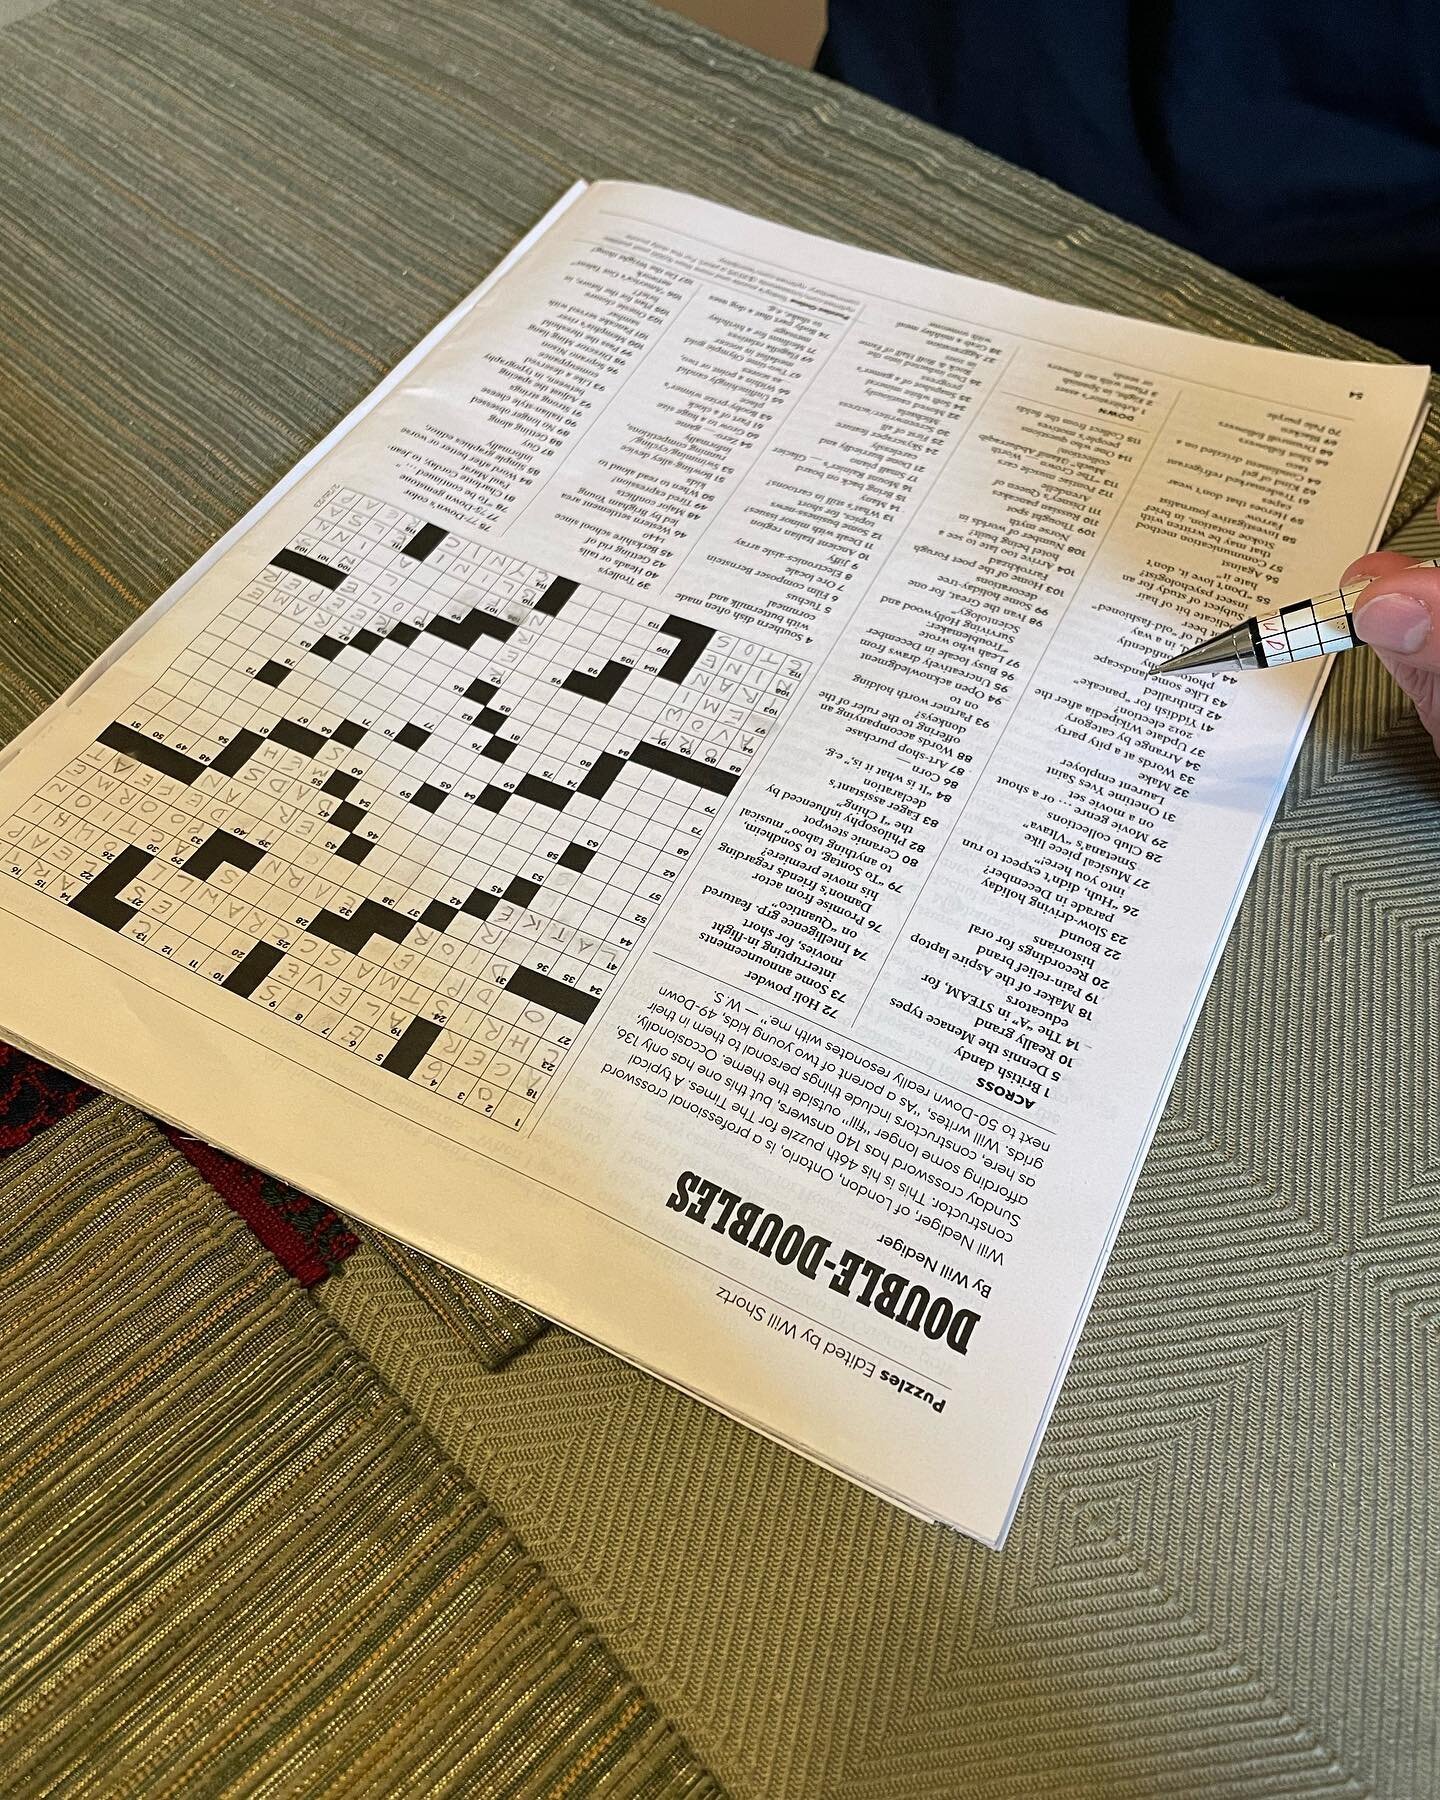 Our weekly diversion.  #nytcrosswordpuzzle